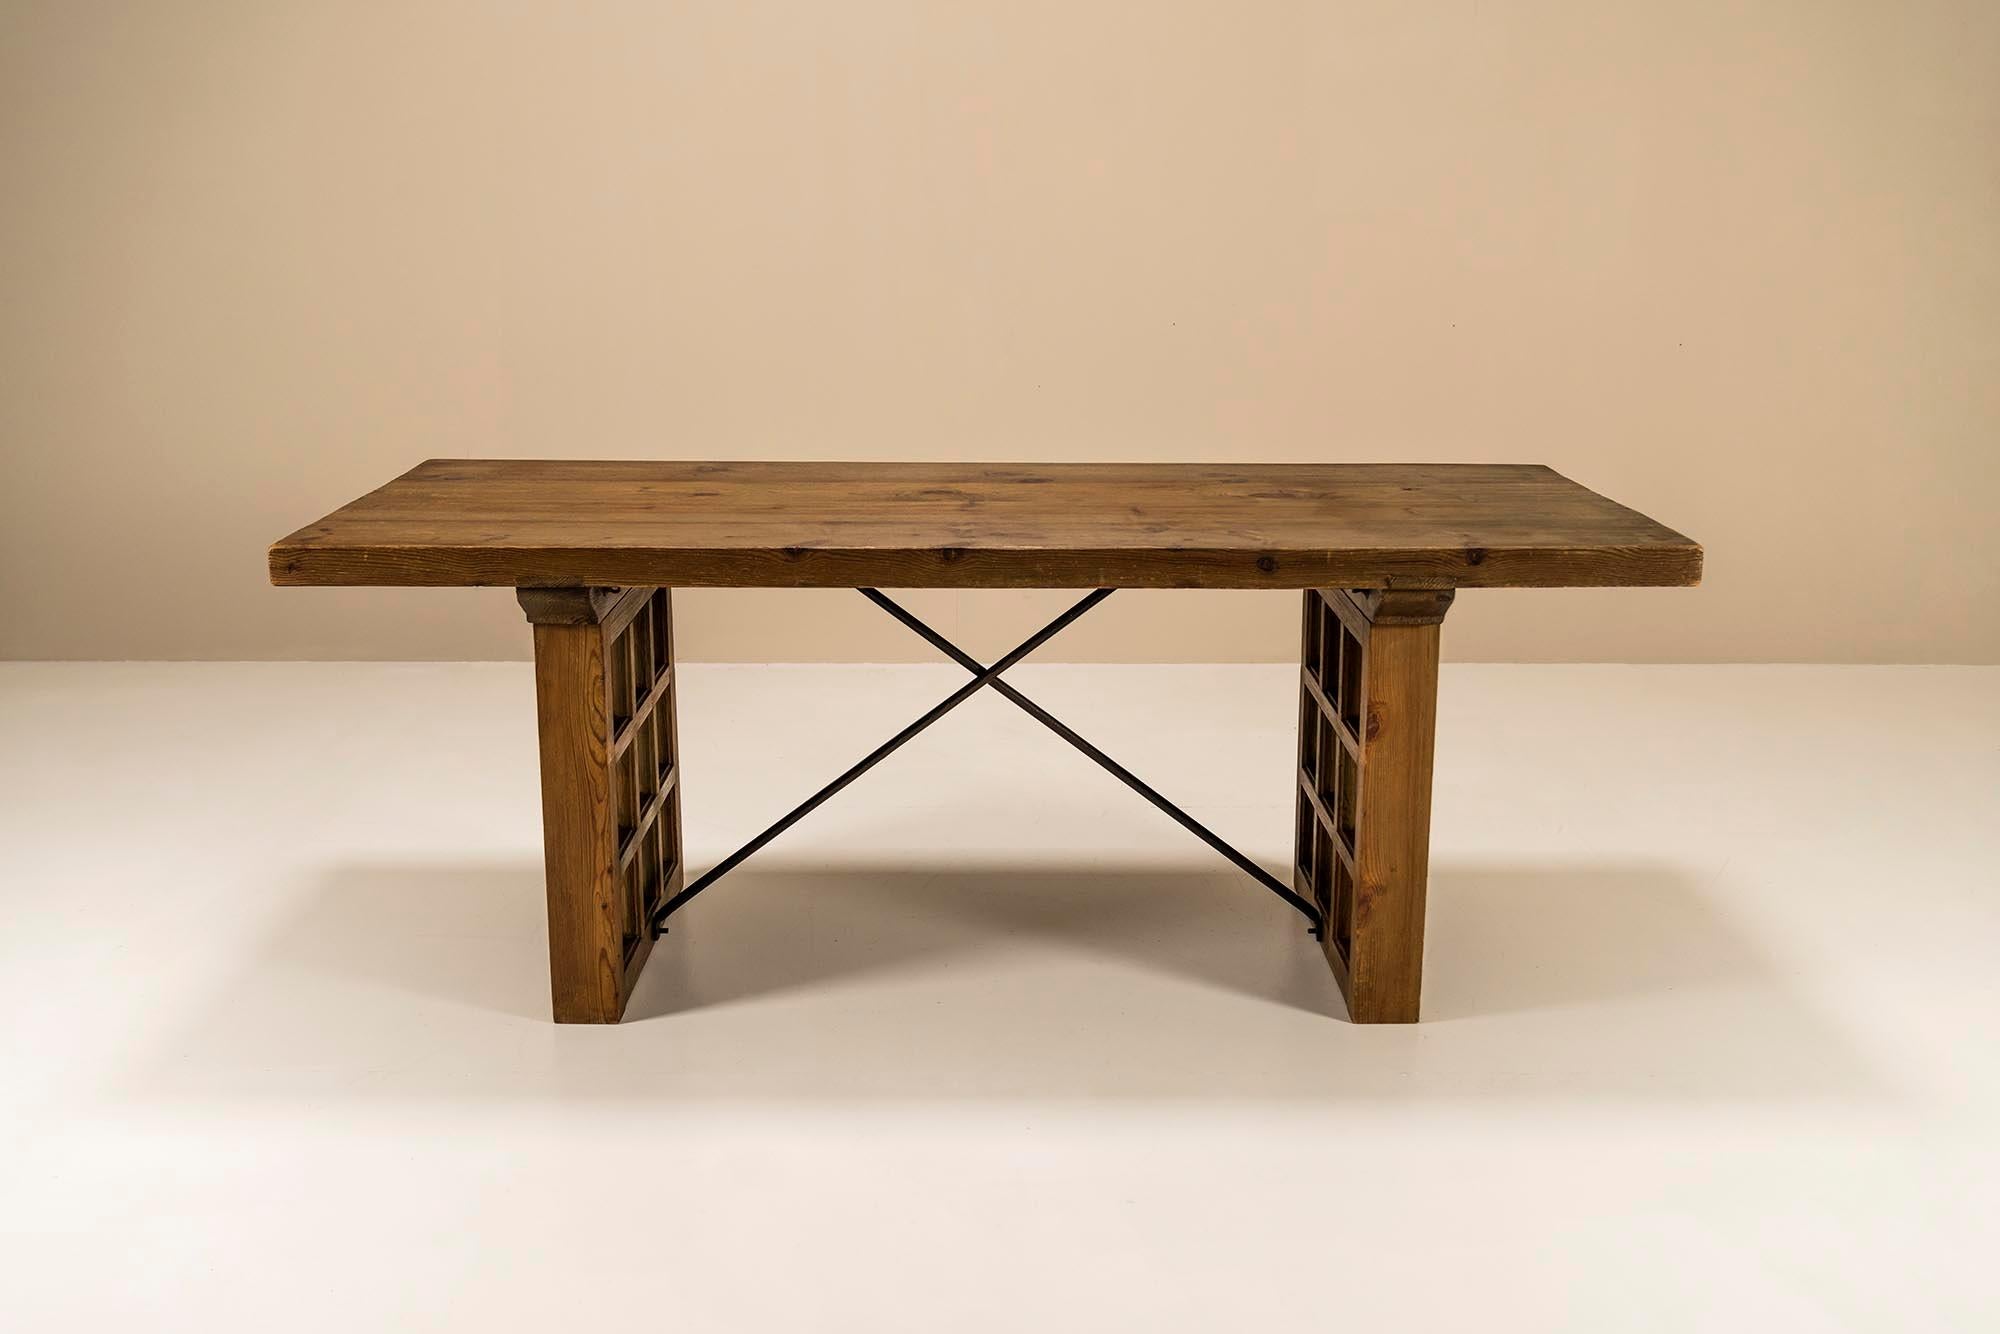 Brutalist Biosca Dining Table With Geometric Patterns In Pine, Spain 1960s For Sale